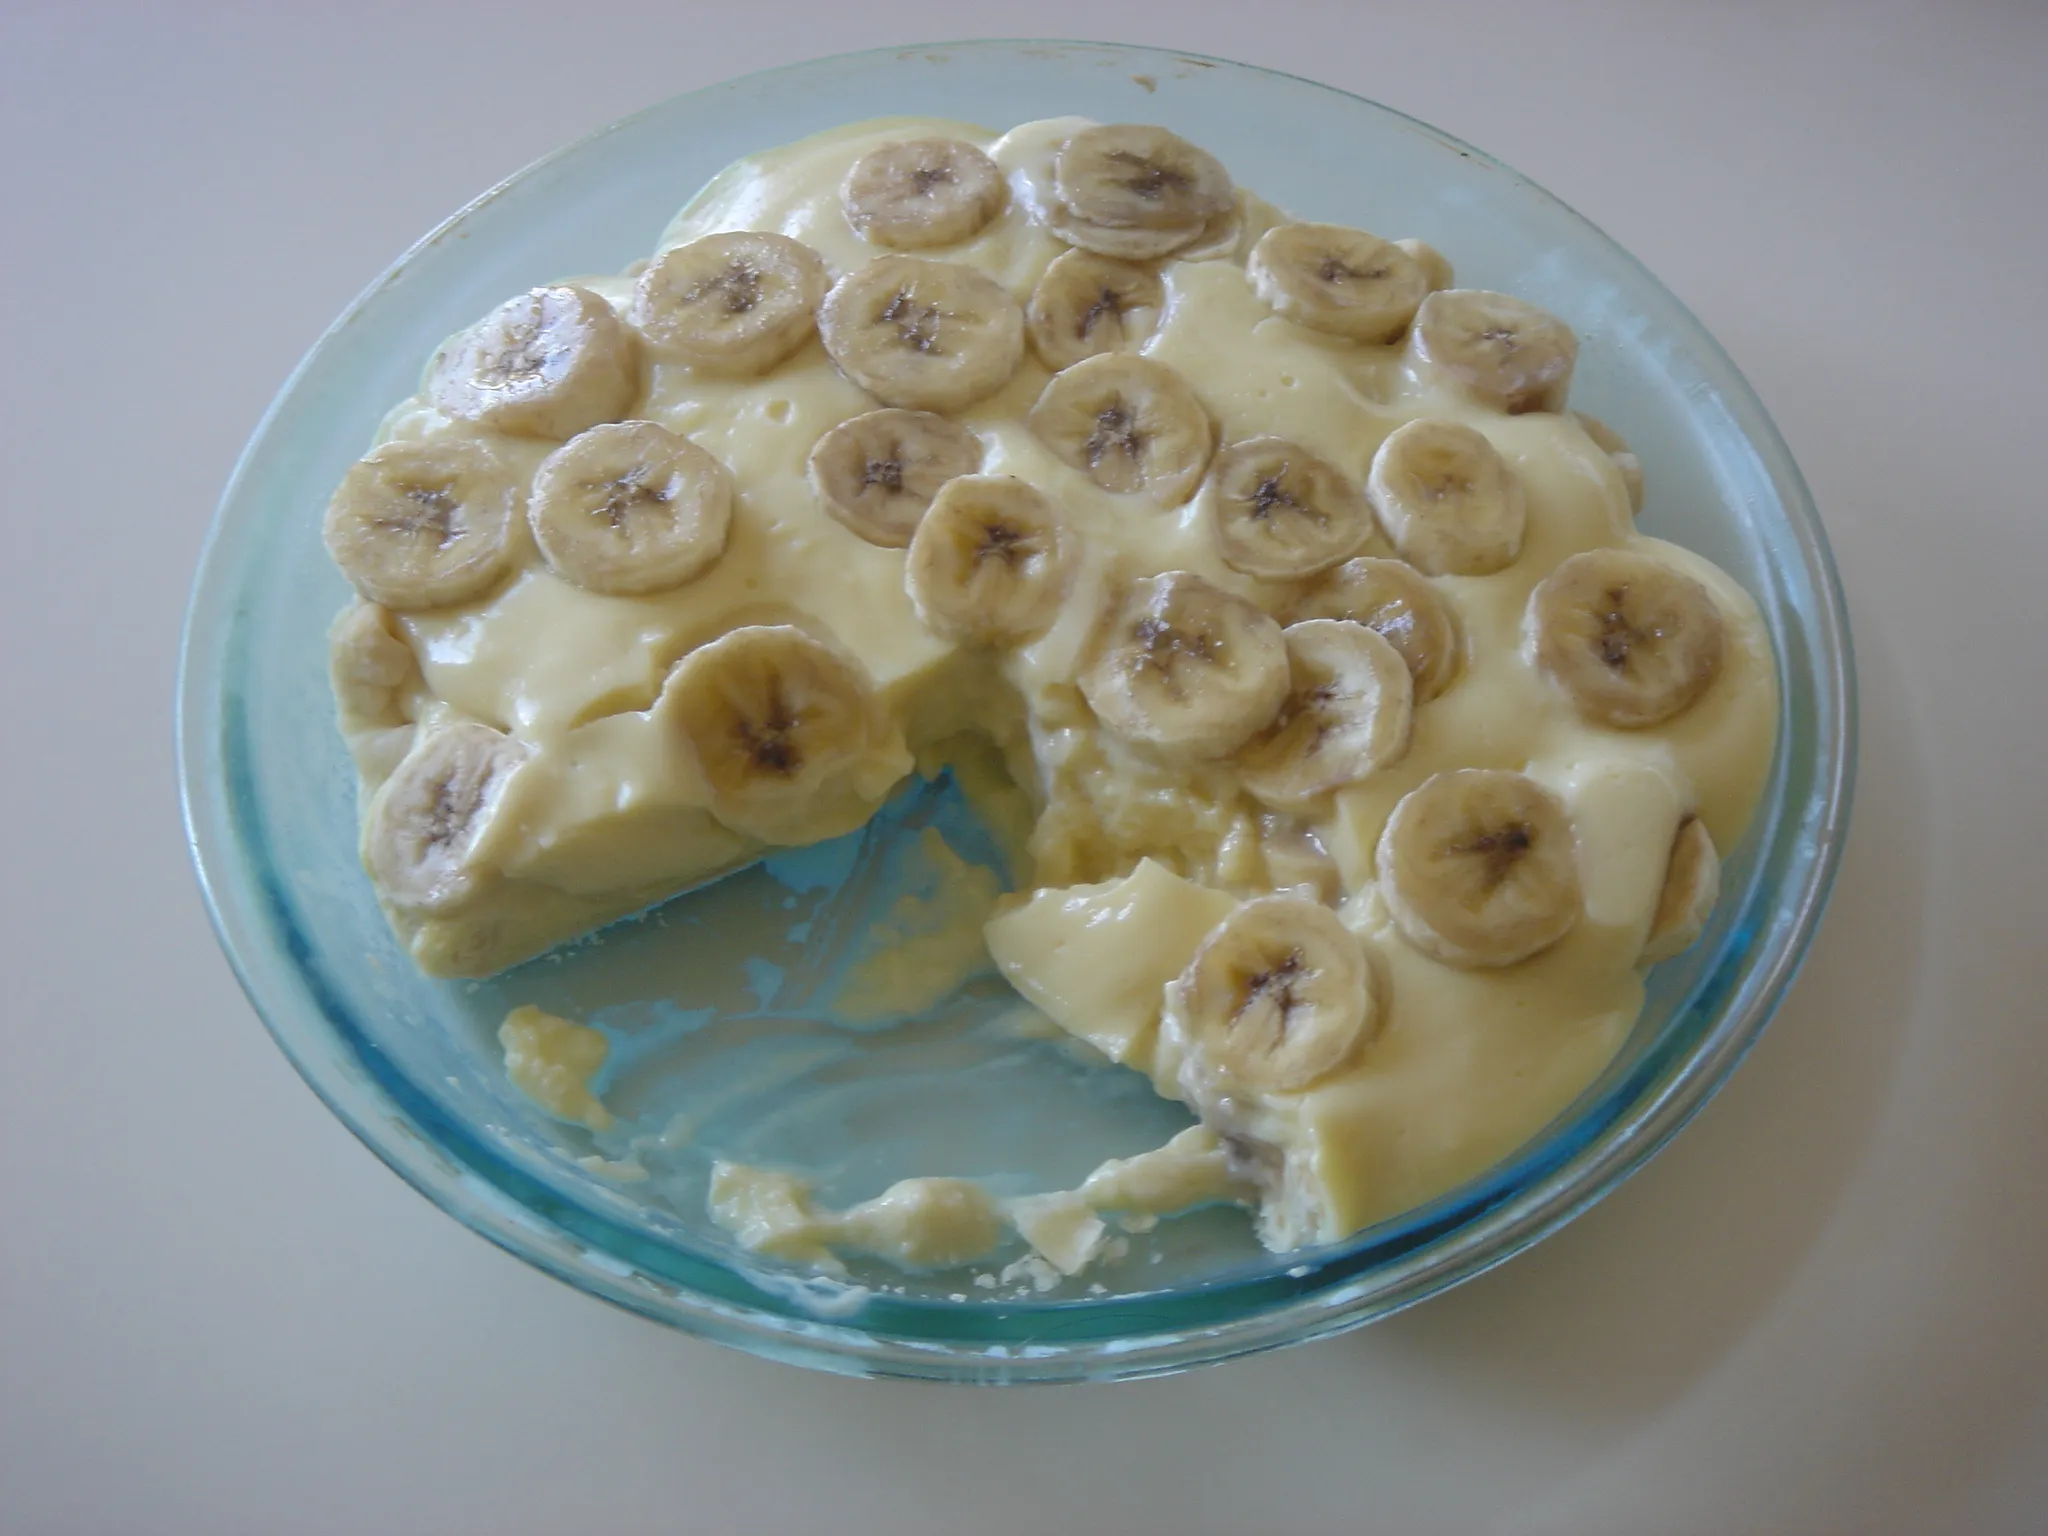 How to Make a Delicious Banana Pudding Dessert with Graham Crackers: Step-by-Step Recipe